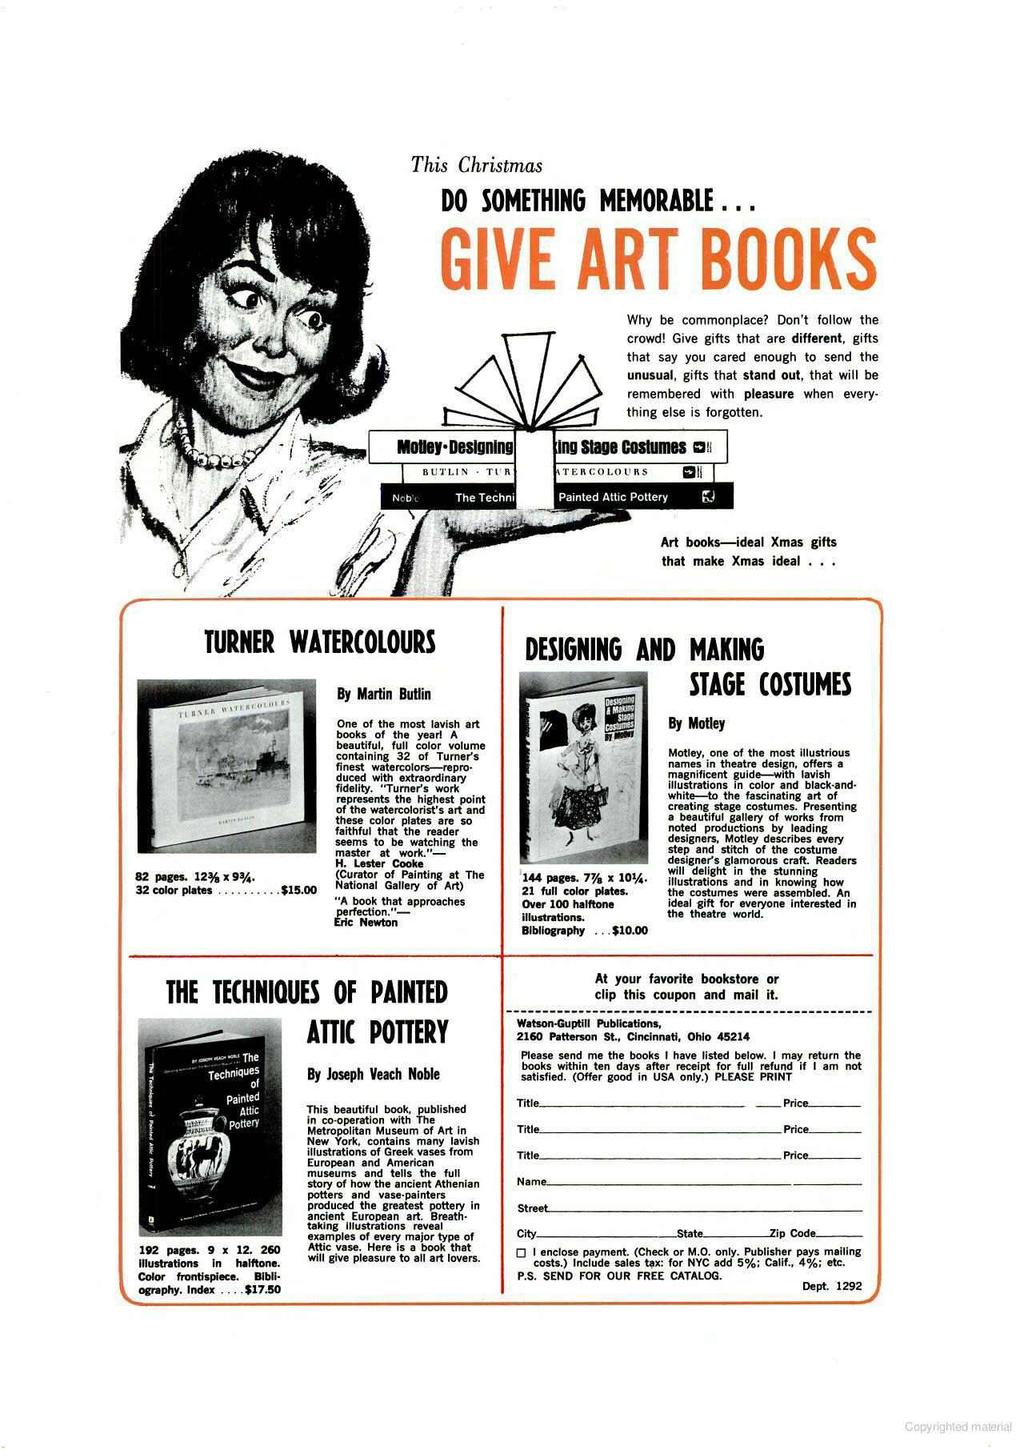 This Christmas DO SOMETHING MEMORABLE... GIVE ART BOOKS Why be commonplace? Don't follow the crowd!